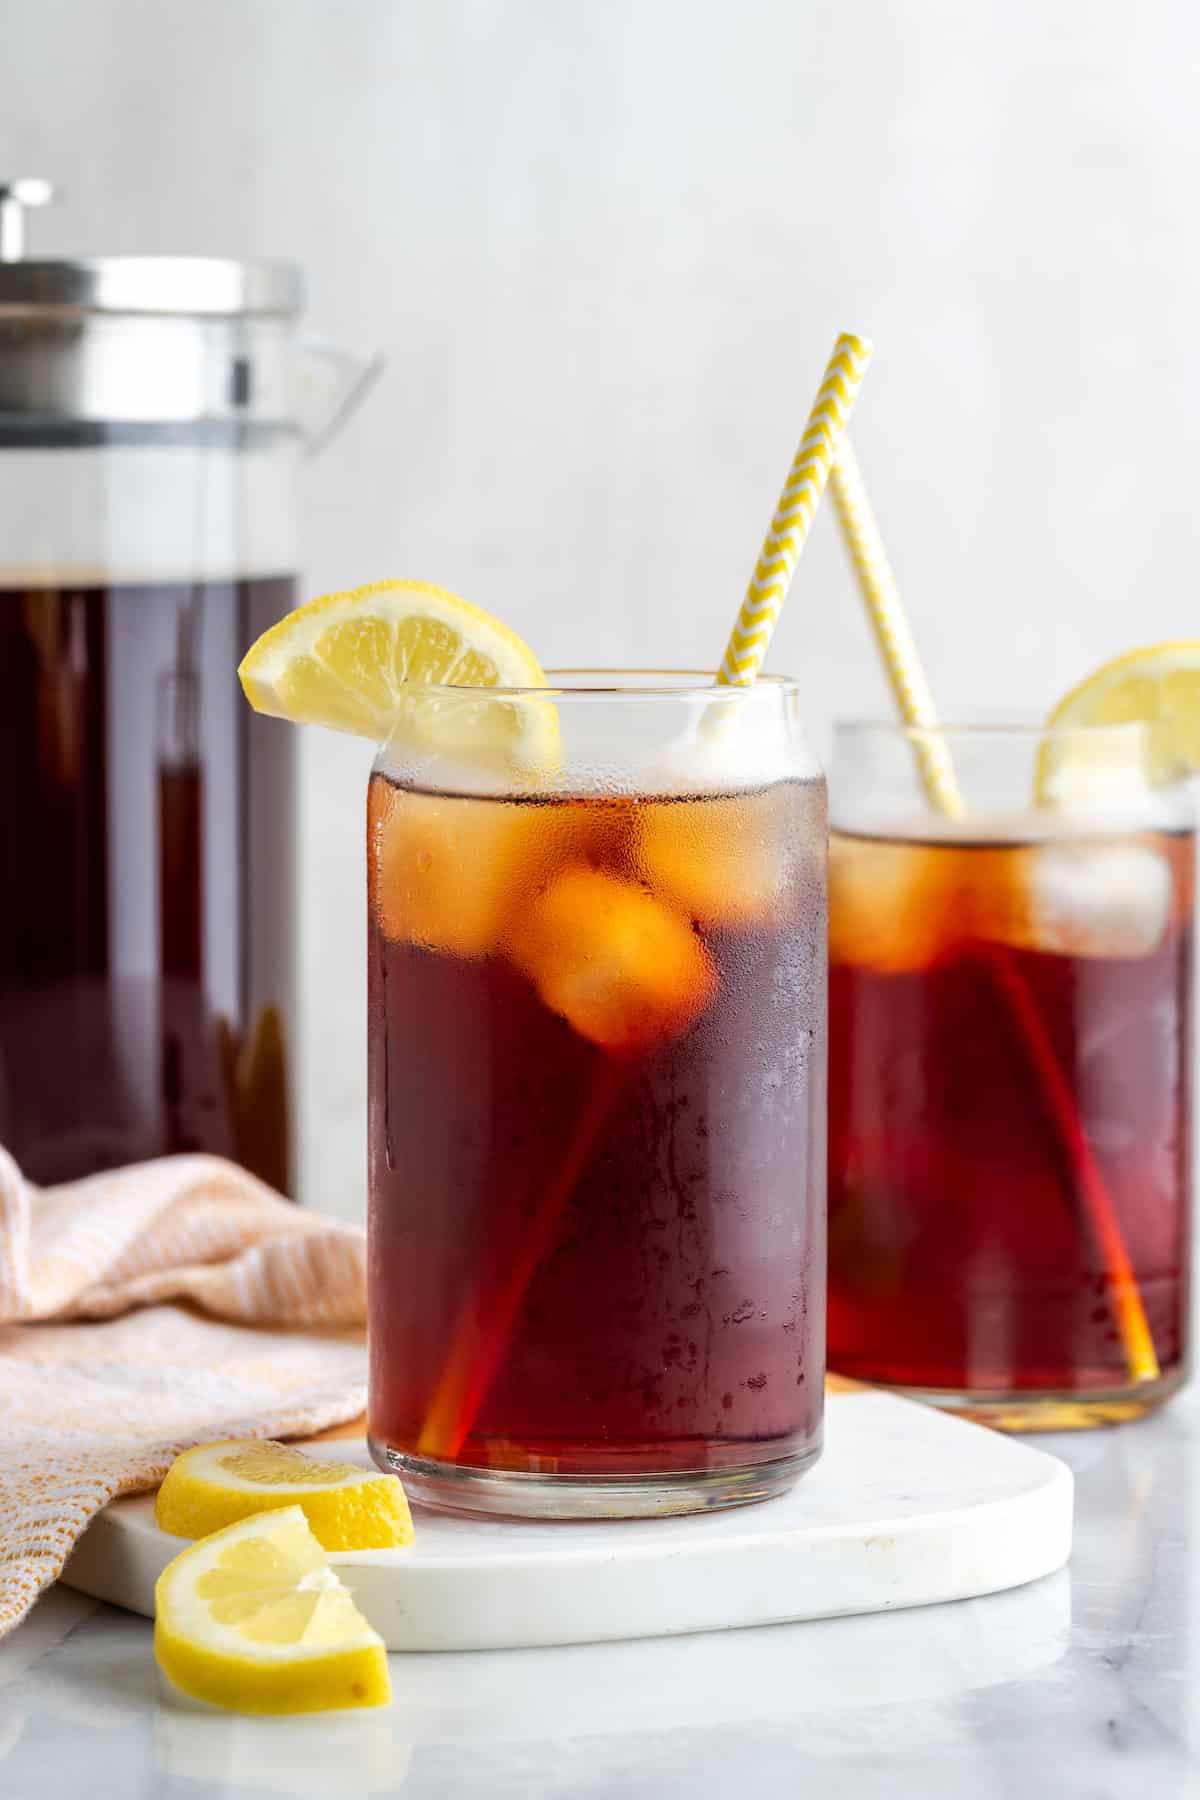 Southern Sweet Tea Recipe (Step-by-Step, Refreshing)